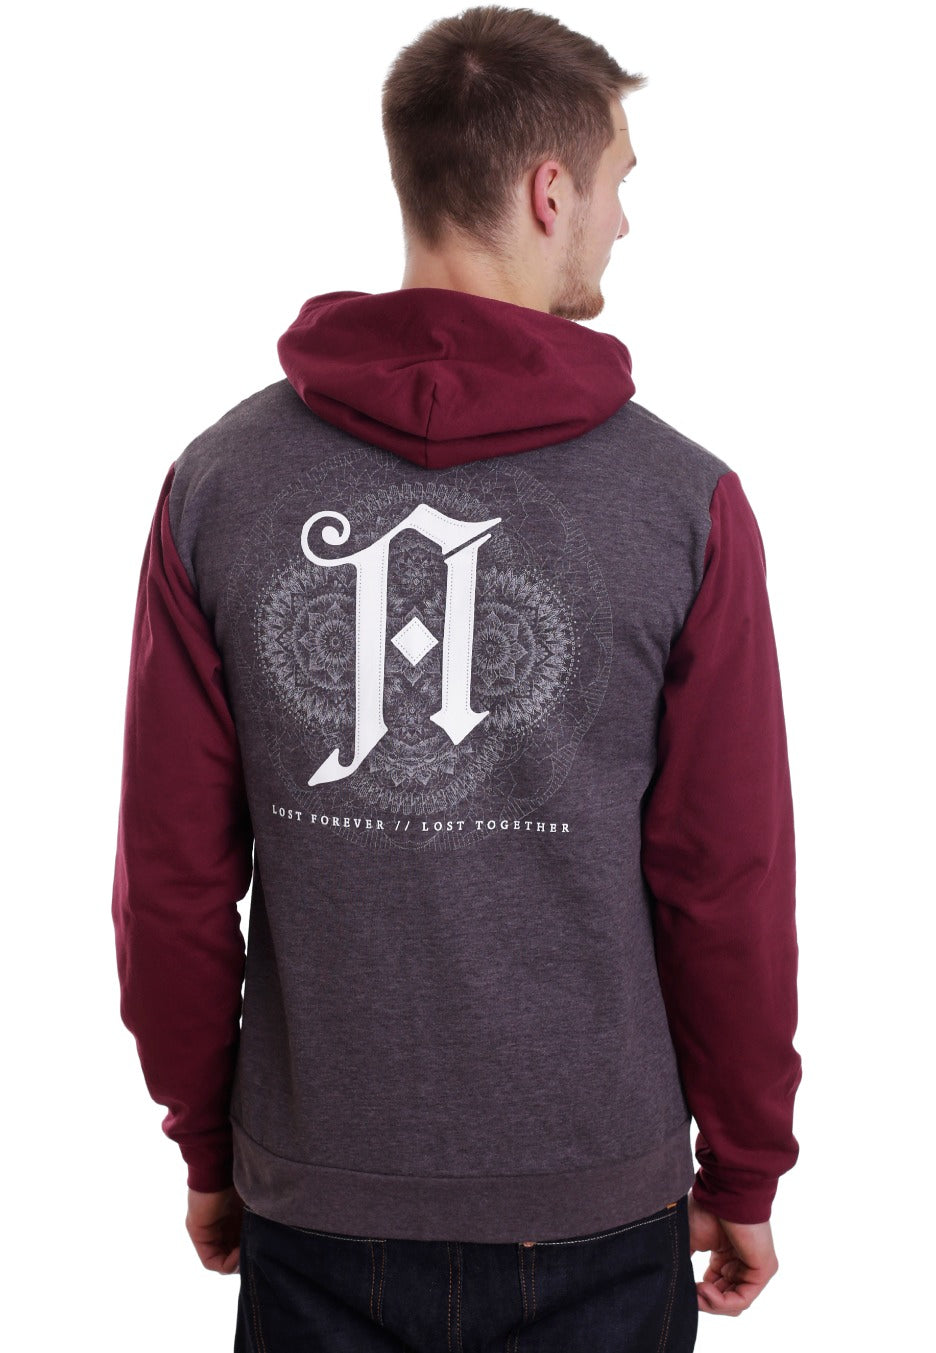 Architects - Lost Forever Charcoal/Burgundy - Zipper | Men-Image